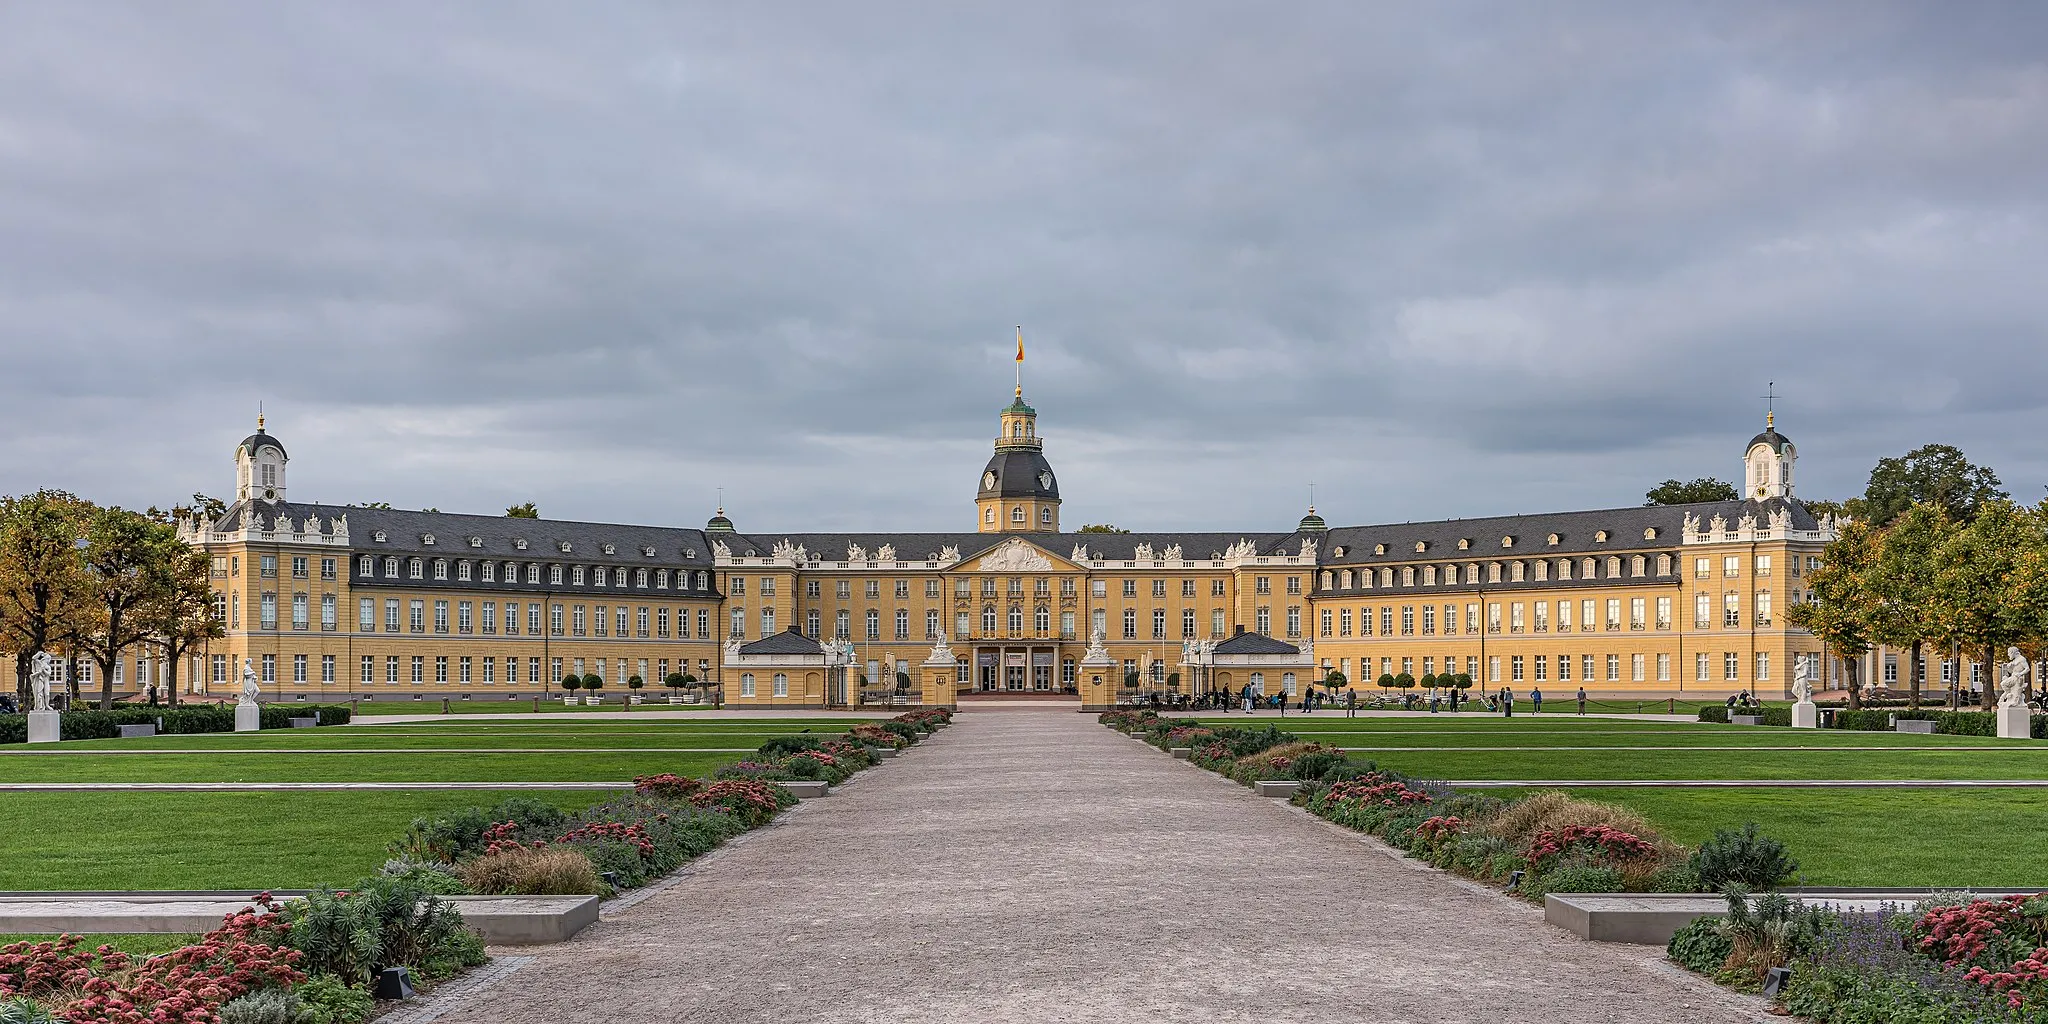 Photo showing: The palace in Karlsruhe, Baden-Württemberg, Germany